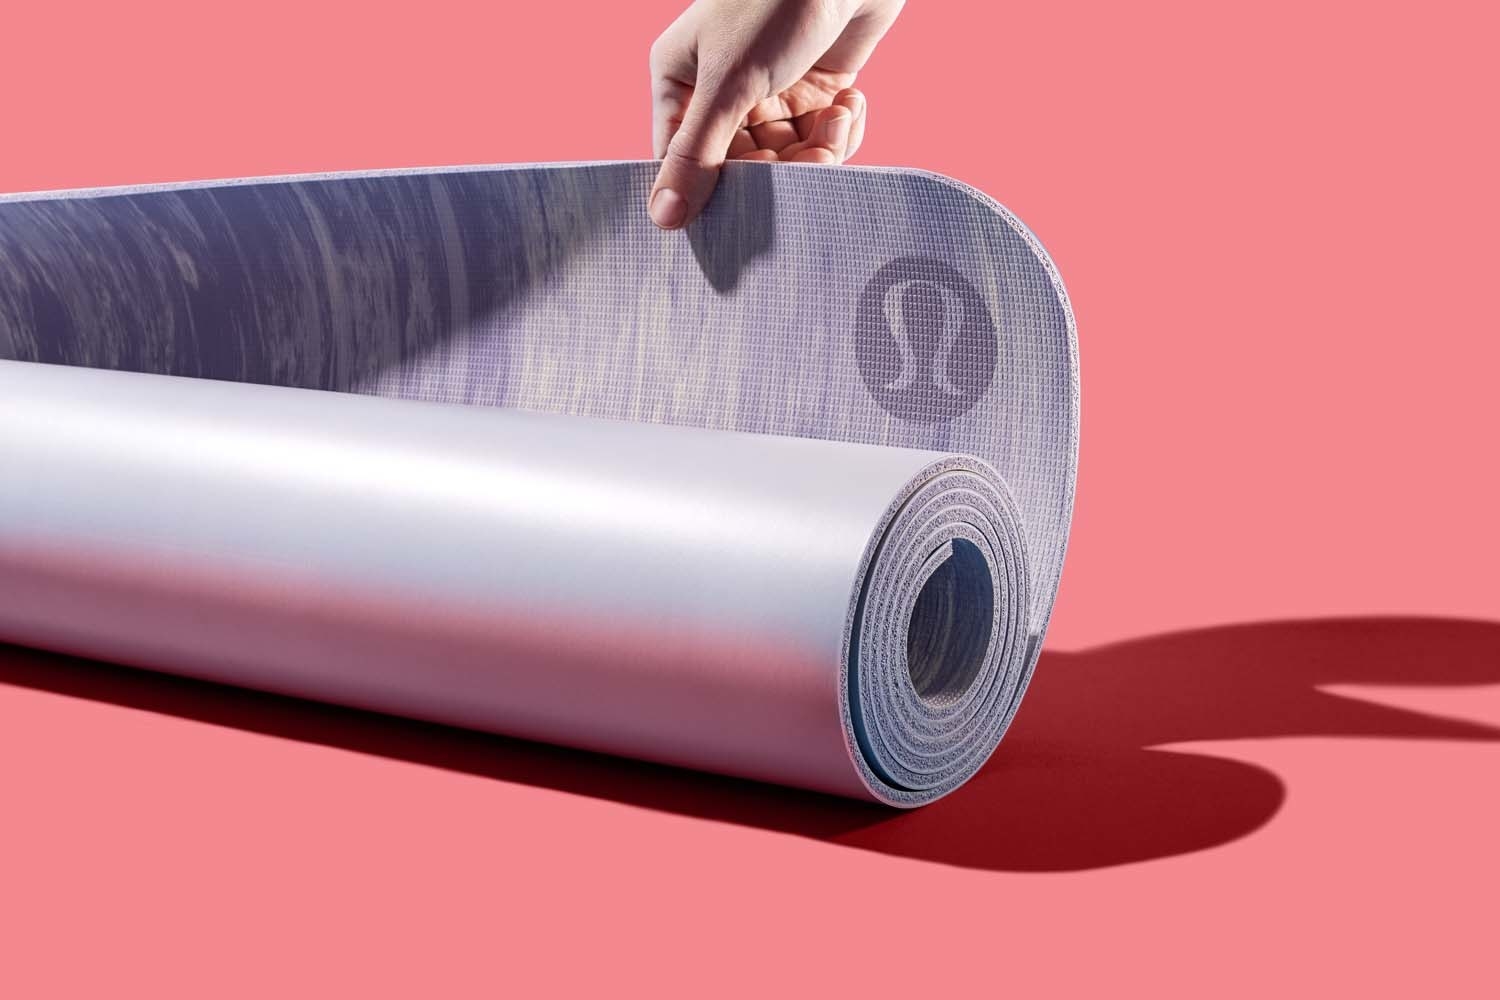 Lululemon The Reversible Mat review: two yoga mats in one, for